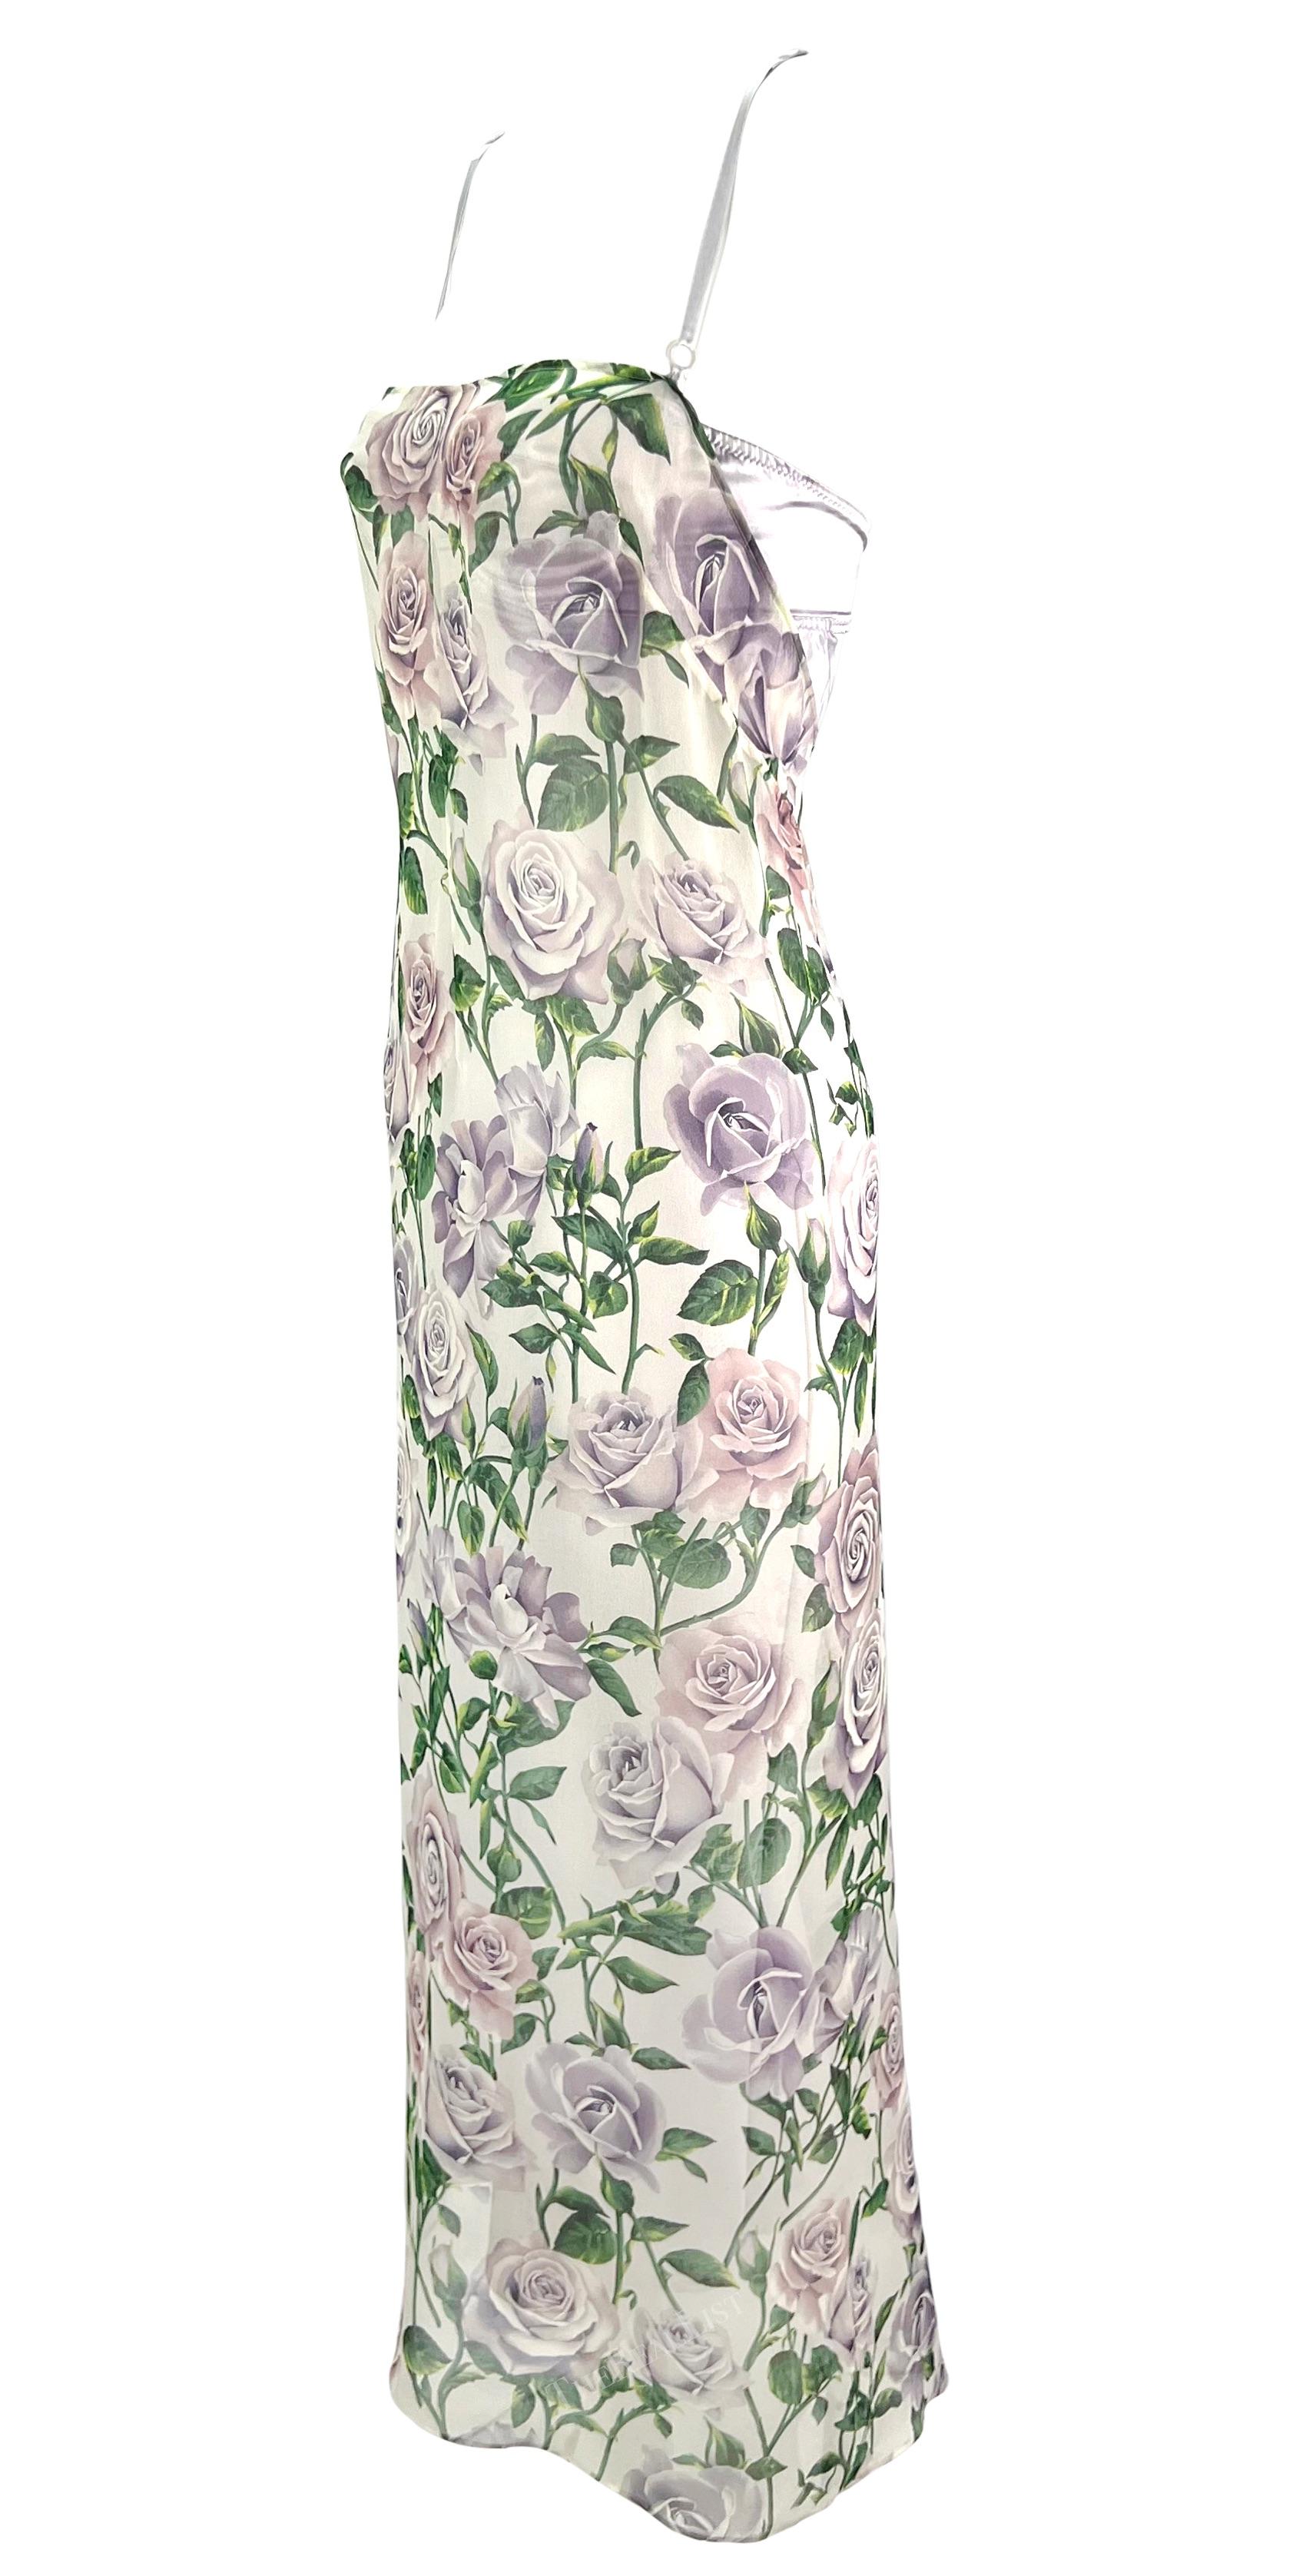 Early 2000s Dolce & Gabbana Sheer Chiffon White Purple Rose Print Overlay Gown For Sale 5